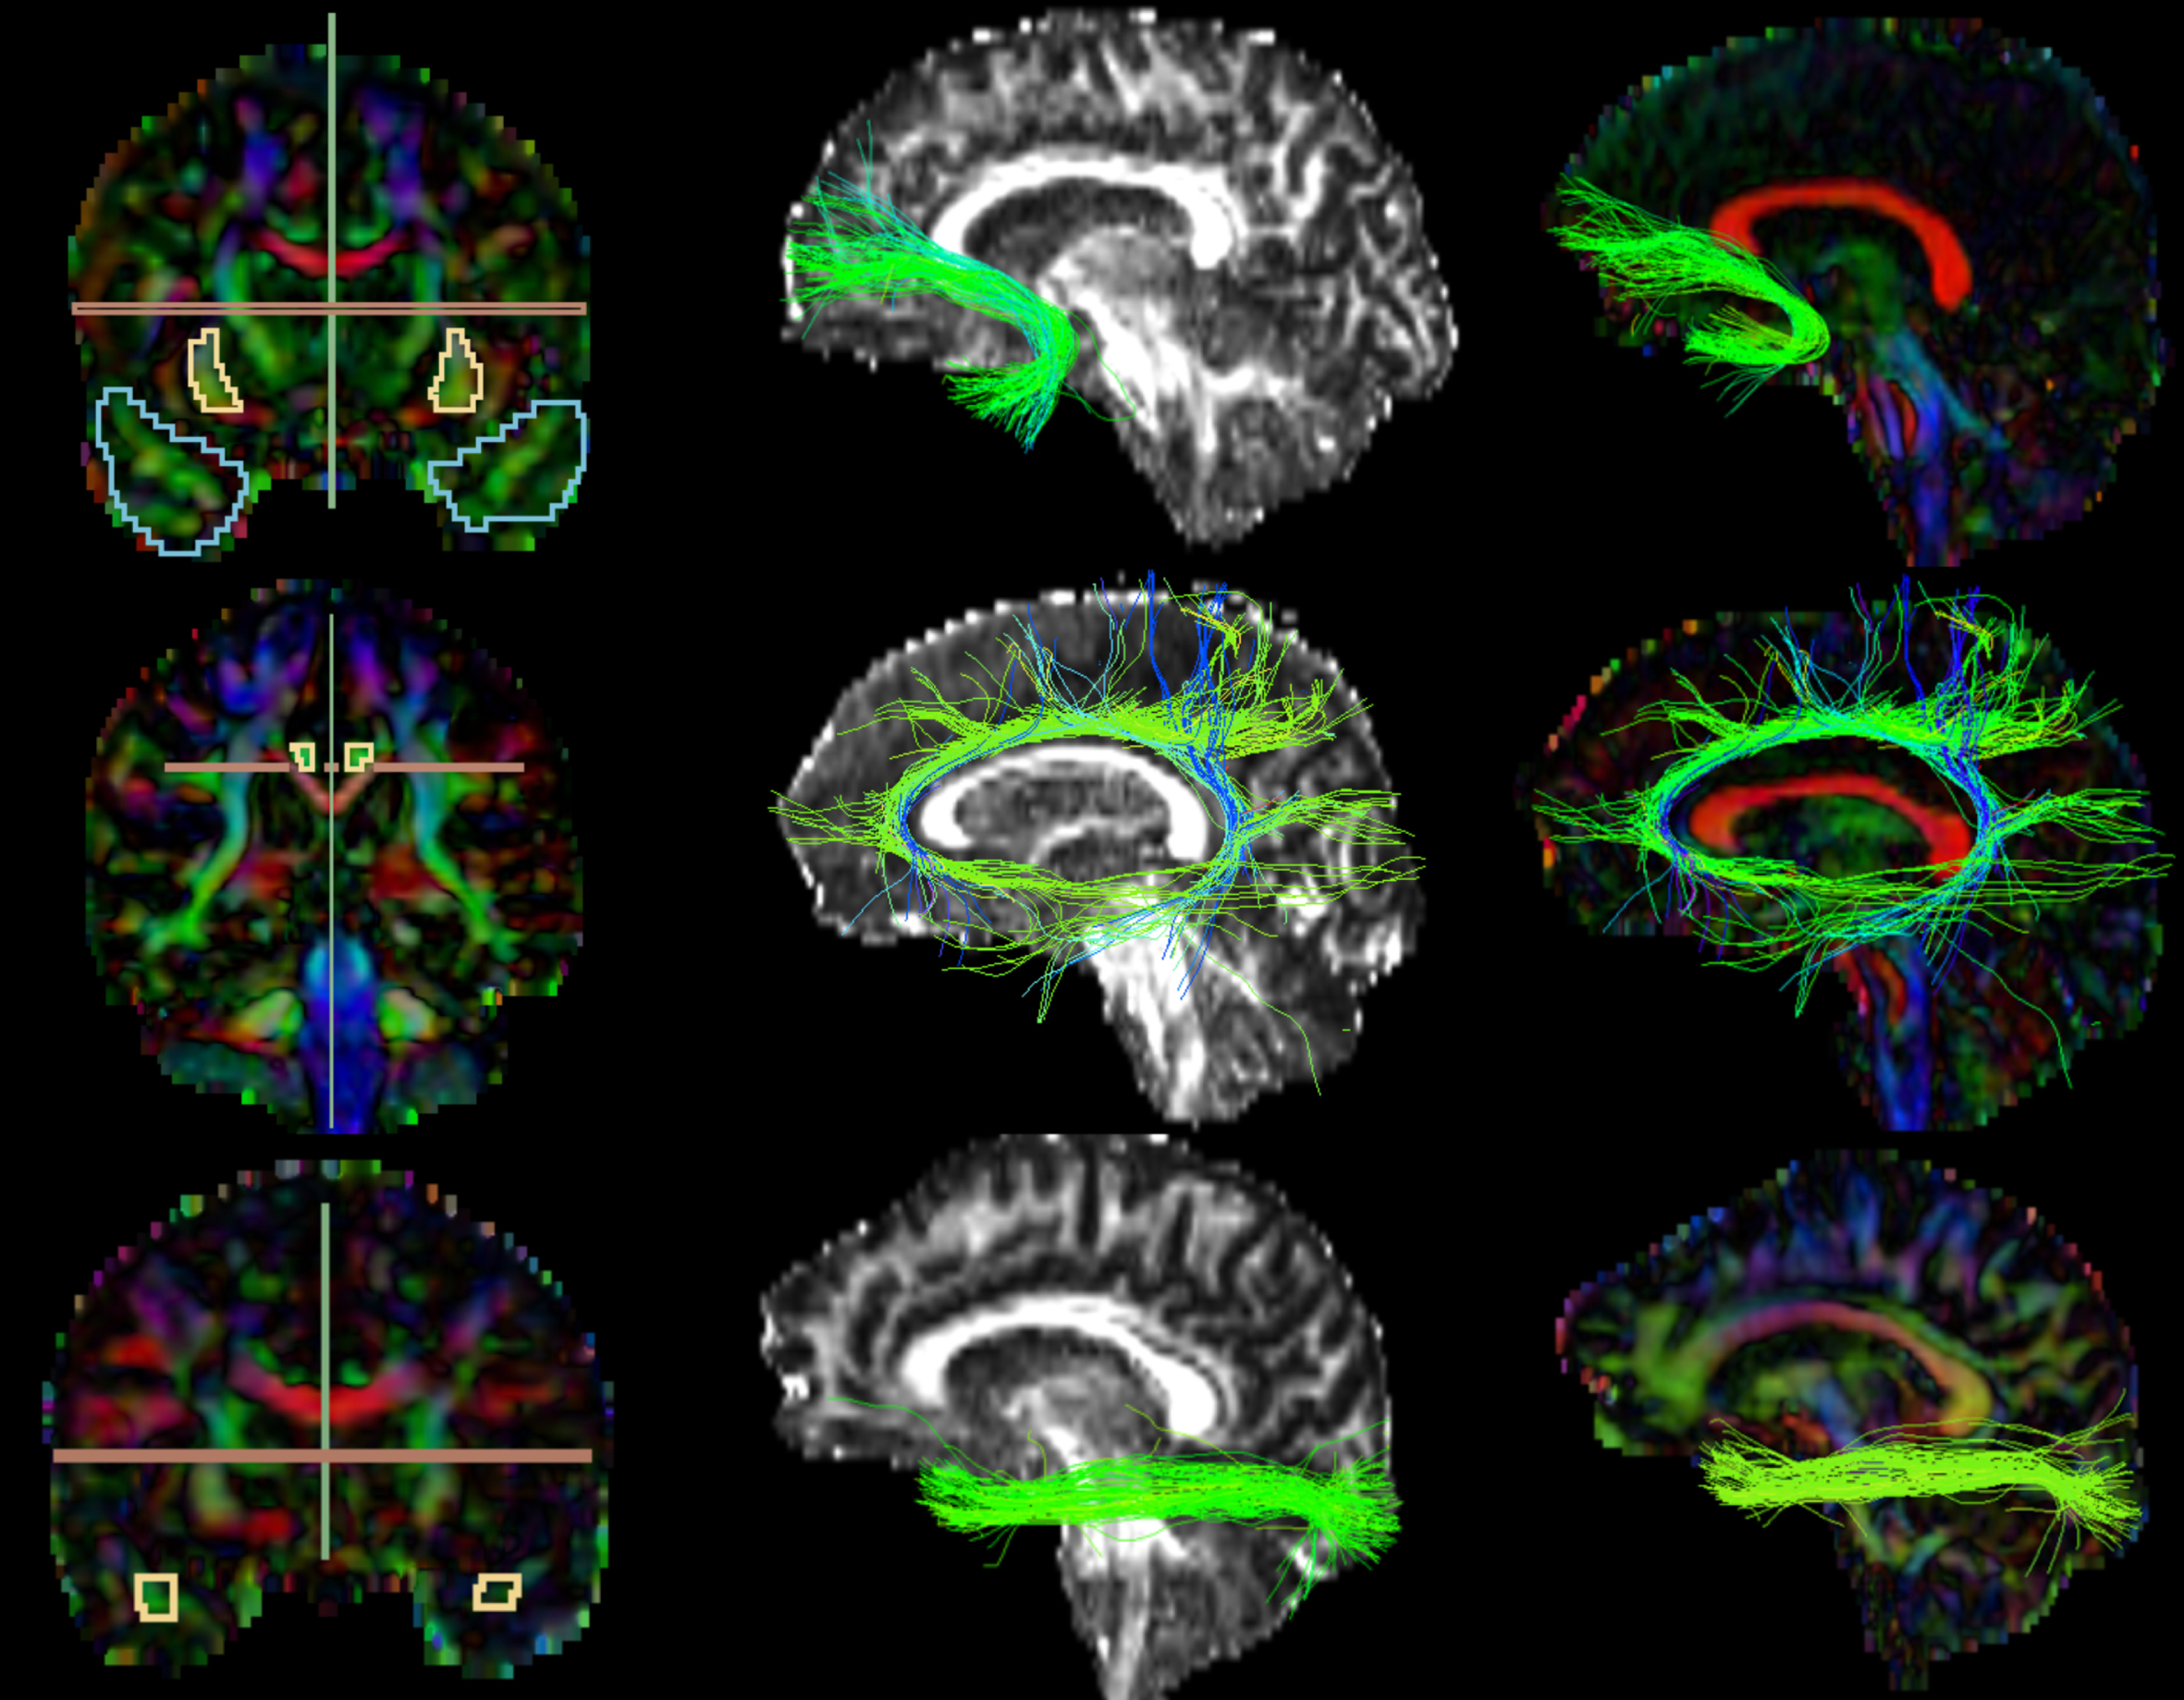 Extracted Tracts. The first images on the left column partially represent the manual drawings of the inclusion and exclusion areas; 1st row) Uncinate Fasciculus: blue (temporal area) and yellow (external capsule) inclusion, green and red exclusion; 2nd row) Cingulate: yellow inclusion, red and green exclusion; 3rd row) Inferior Longitudinal Fasciculus: yellow inclusion (temporal area; occipital not shown in the picture), green and red exclusion. The images on the second and third columns represent the extracted tracts shown over the FA and color-by-orientation maps, respectively.